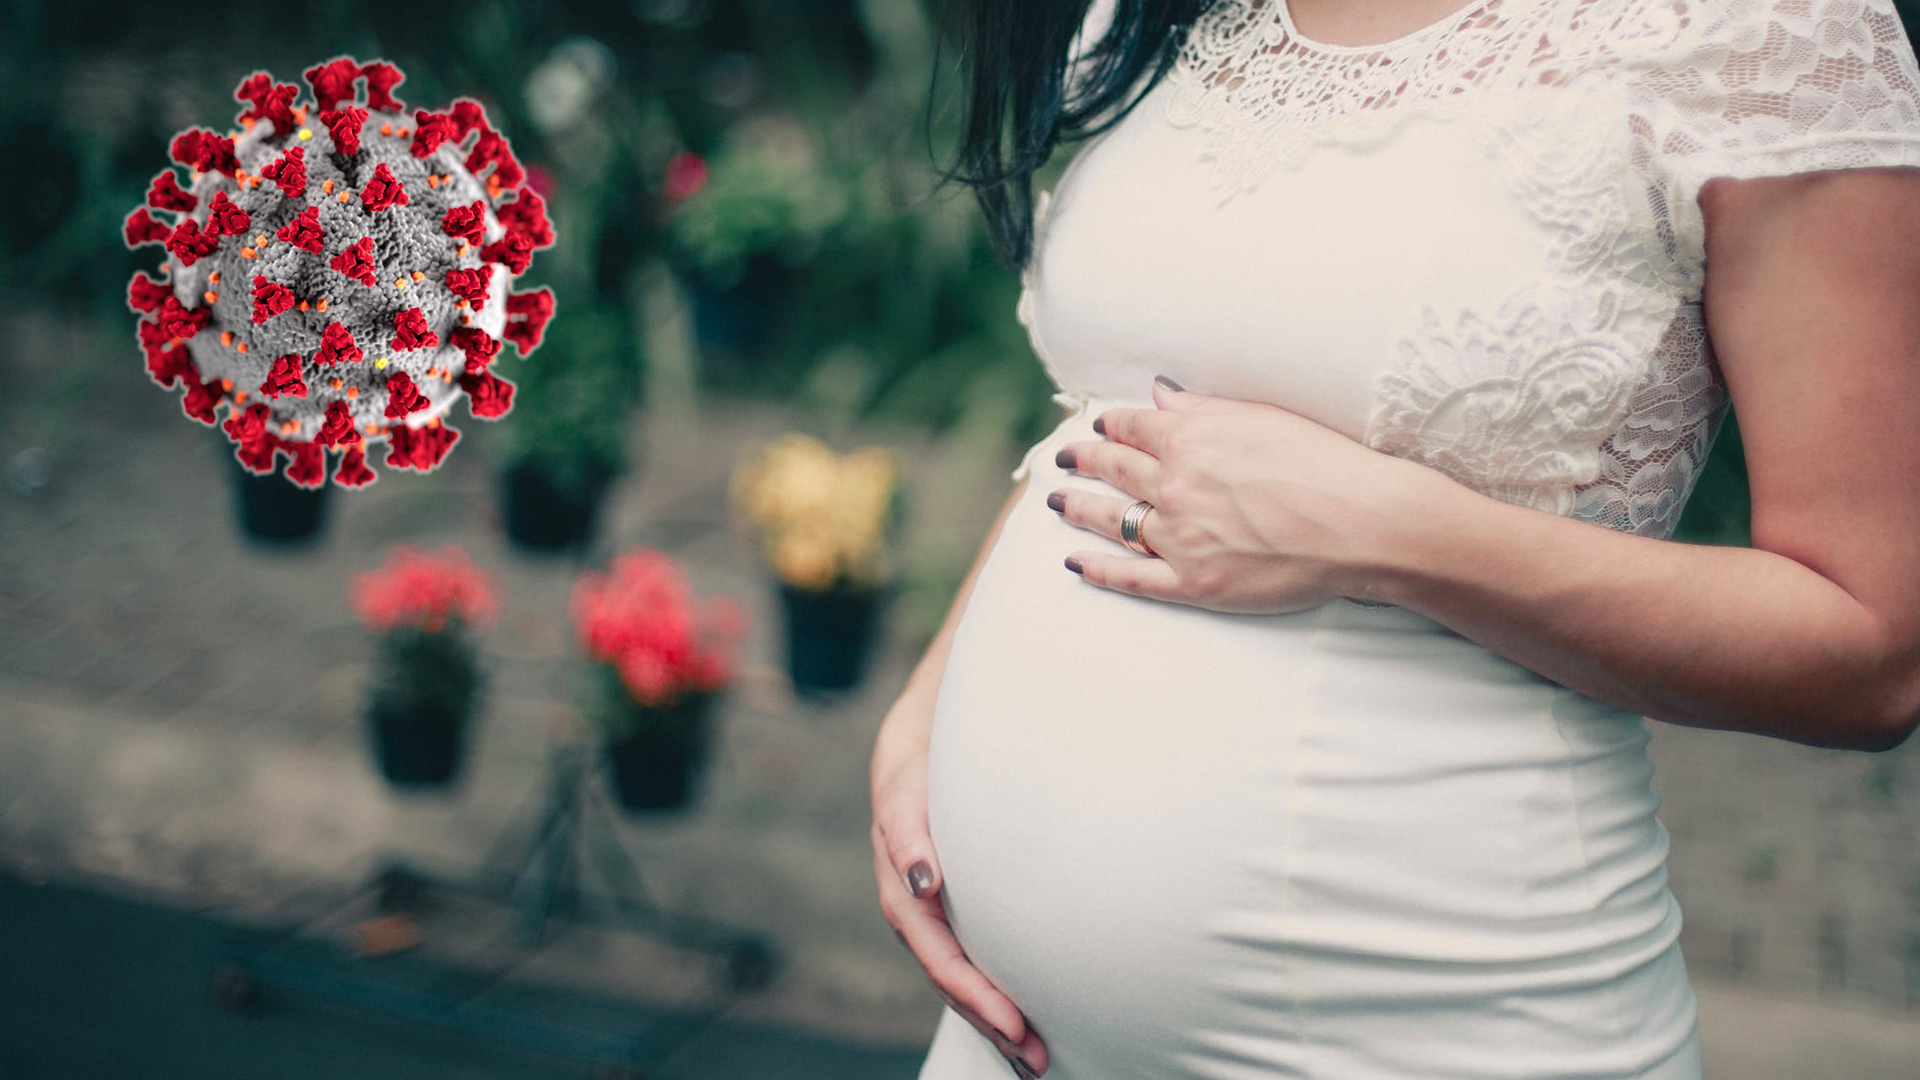 Research reveals higher risk to pregnant women from COVID-19